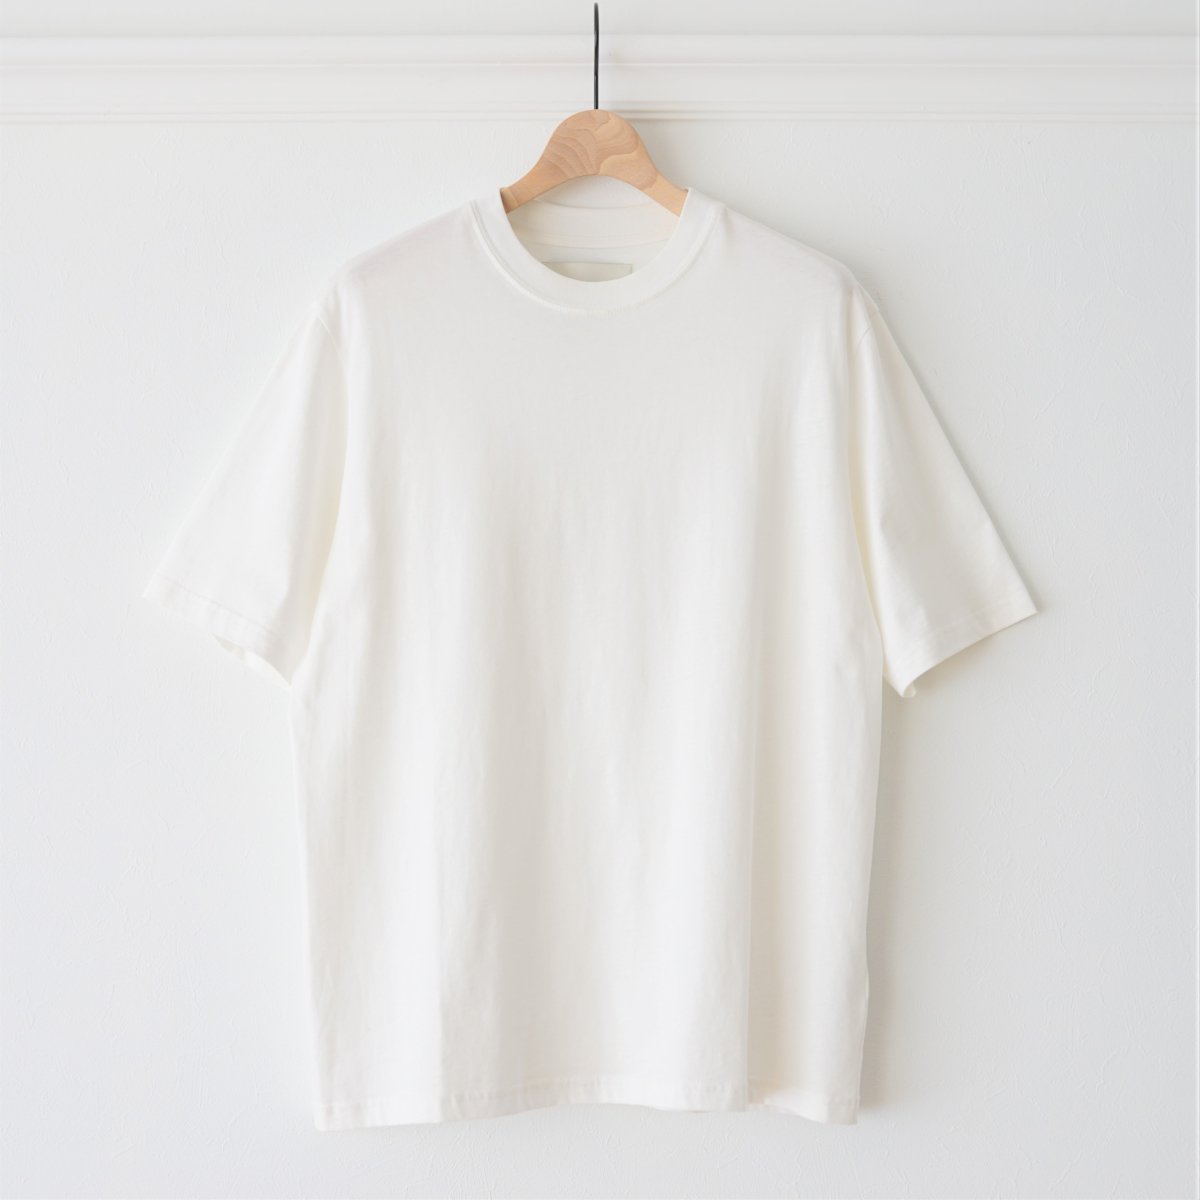 【STUDIO NICHOLSON】LW COMPACT COTTON BRANDED EASY FIT SHORT SLEEVE T-SHIRT - OPTIC WHITE